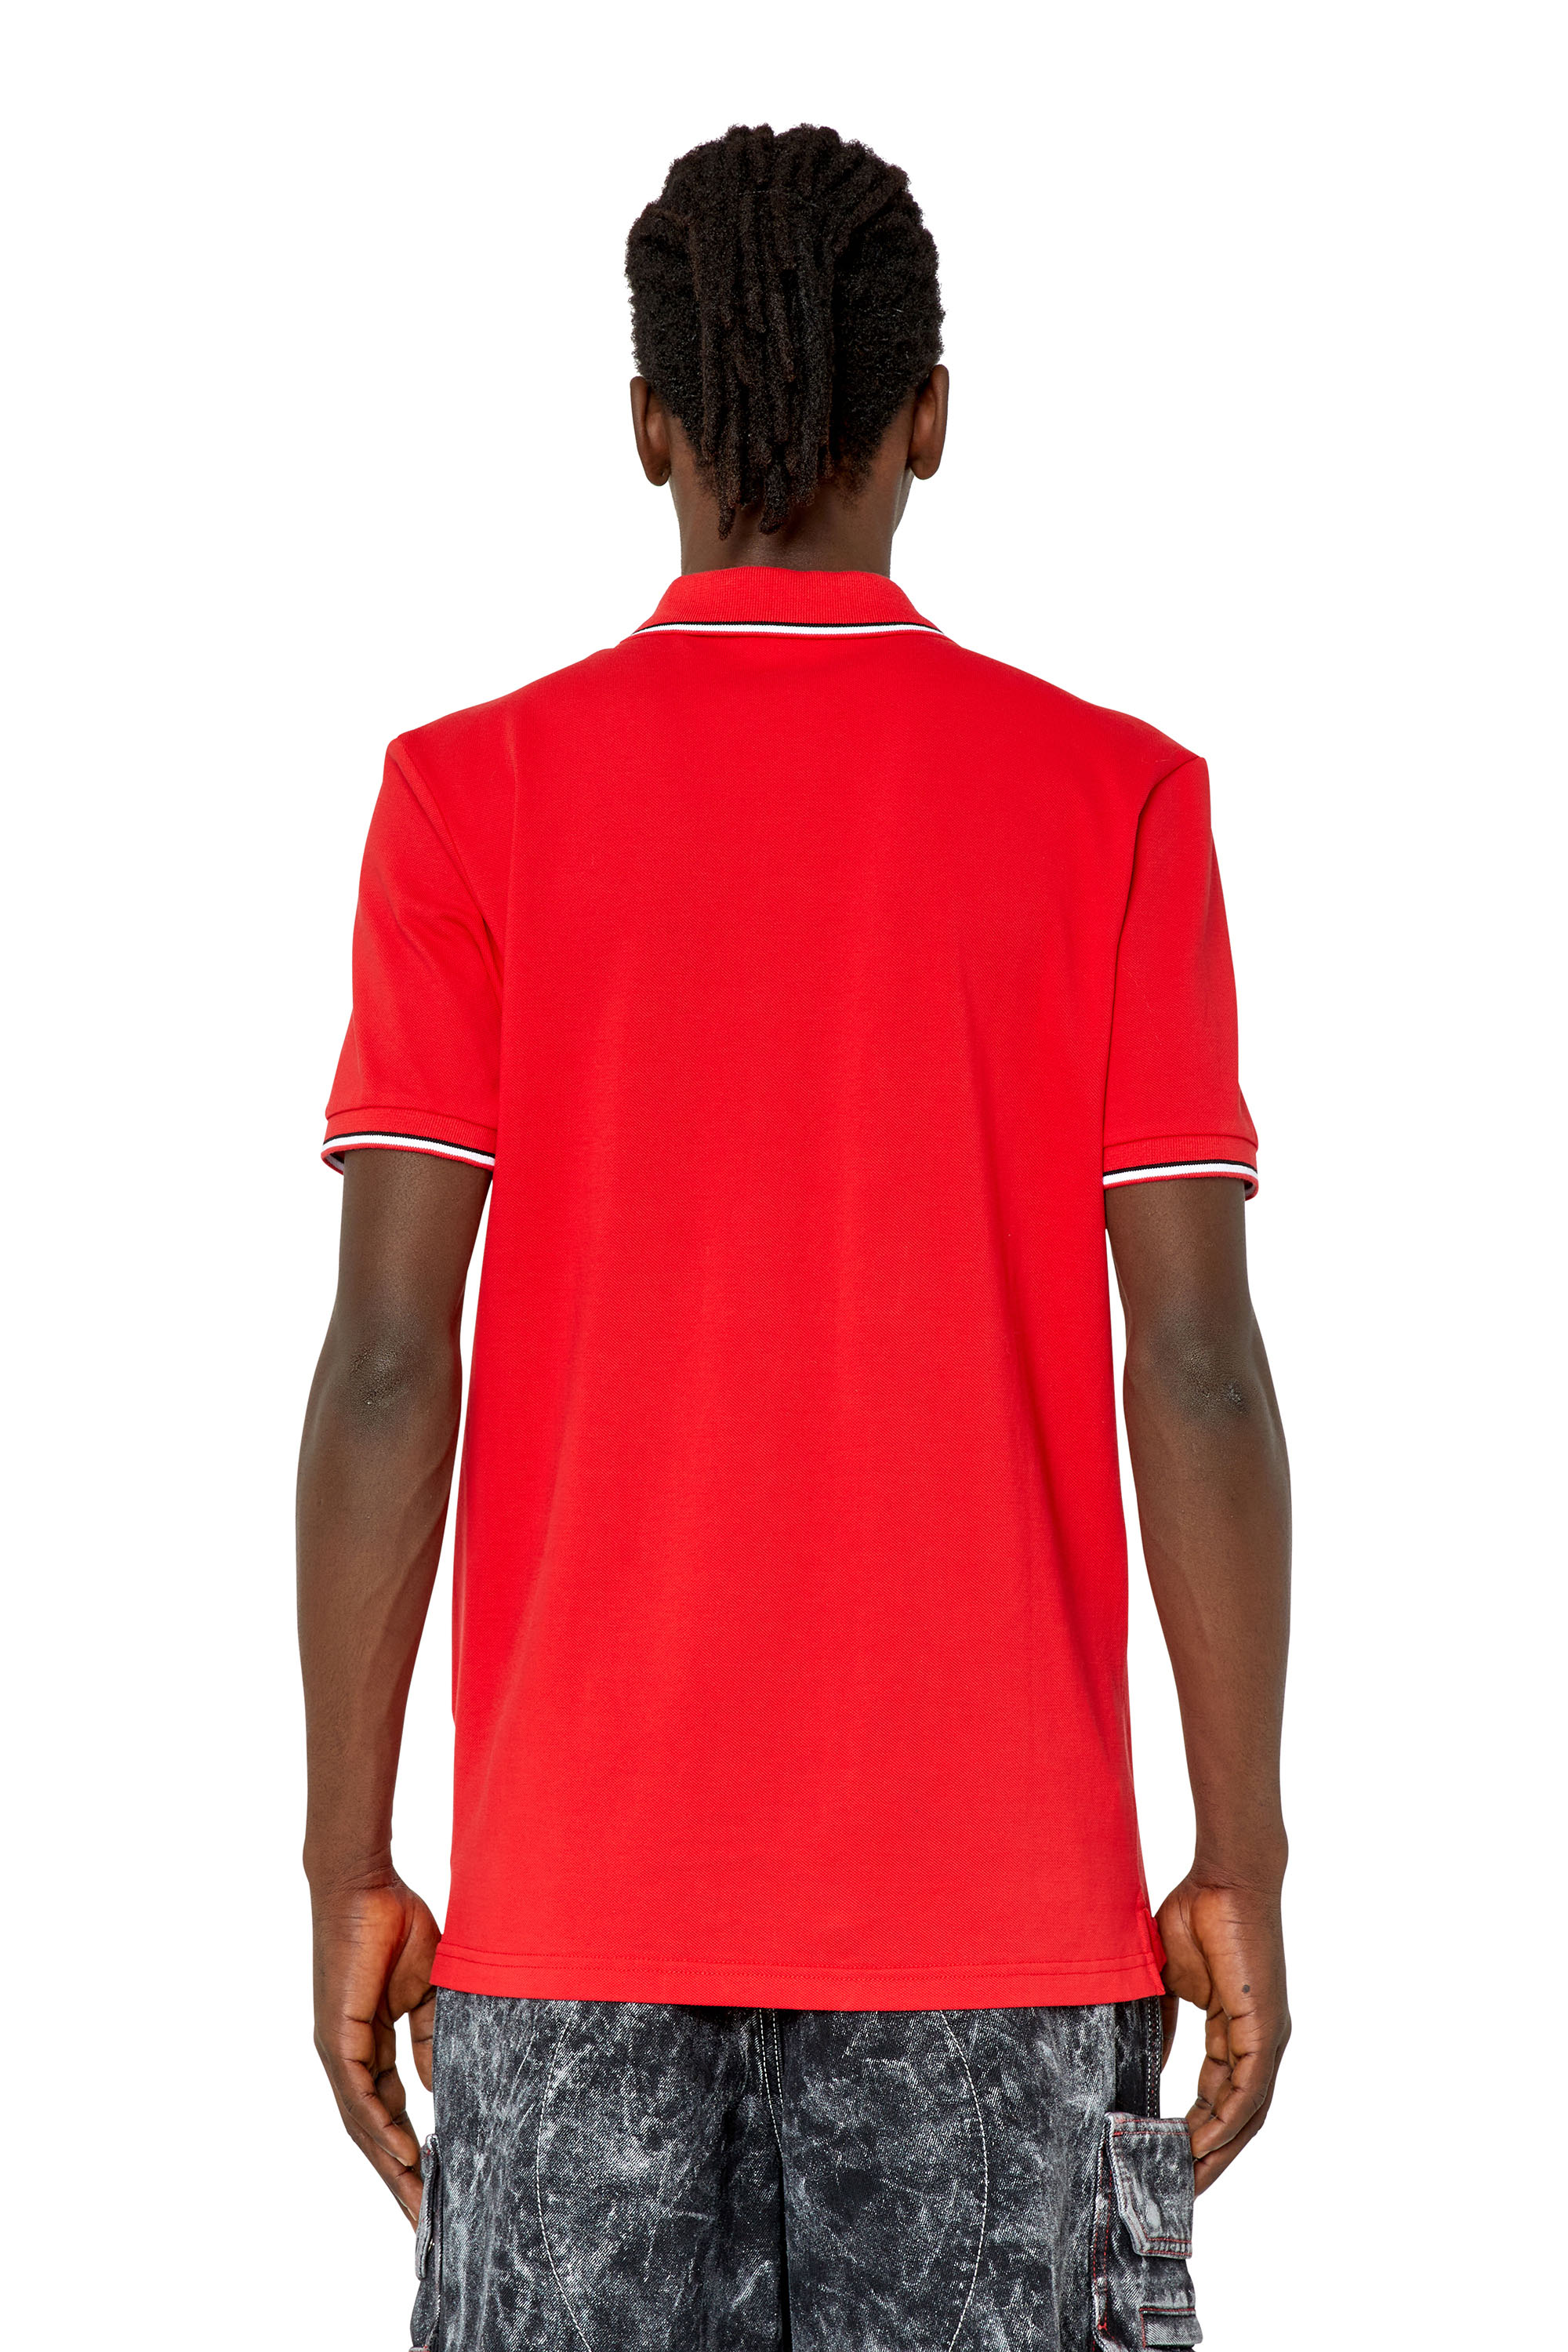 Diesel - T-SMITH-D, Man Polo shirt with striped trims in Red - Image 2